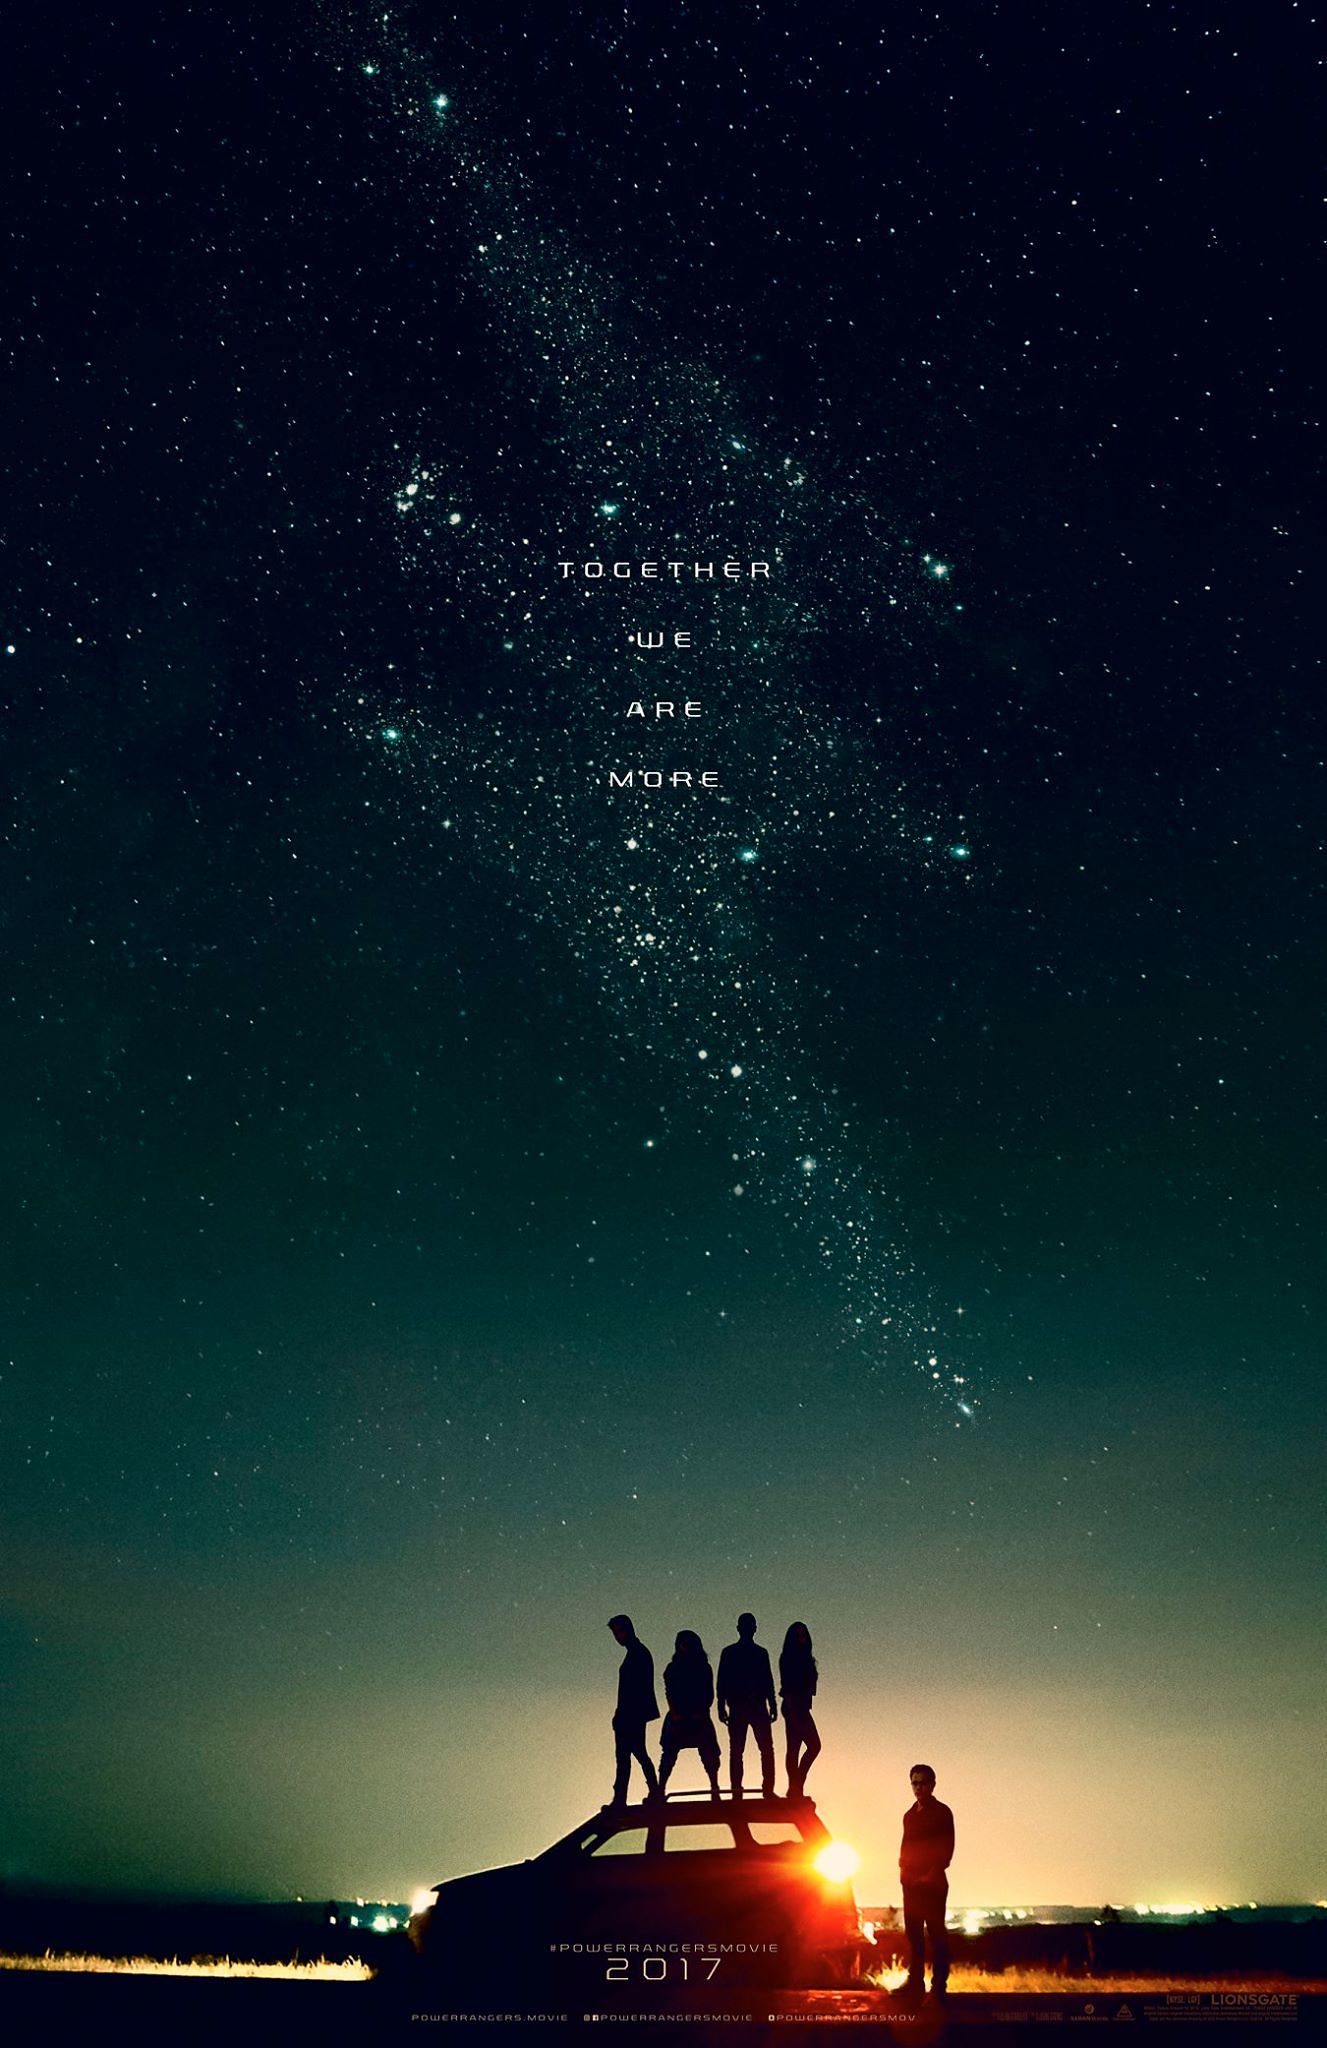 power-rangers-2017-teaser-poster-released-together-we-are-more-1035669